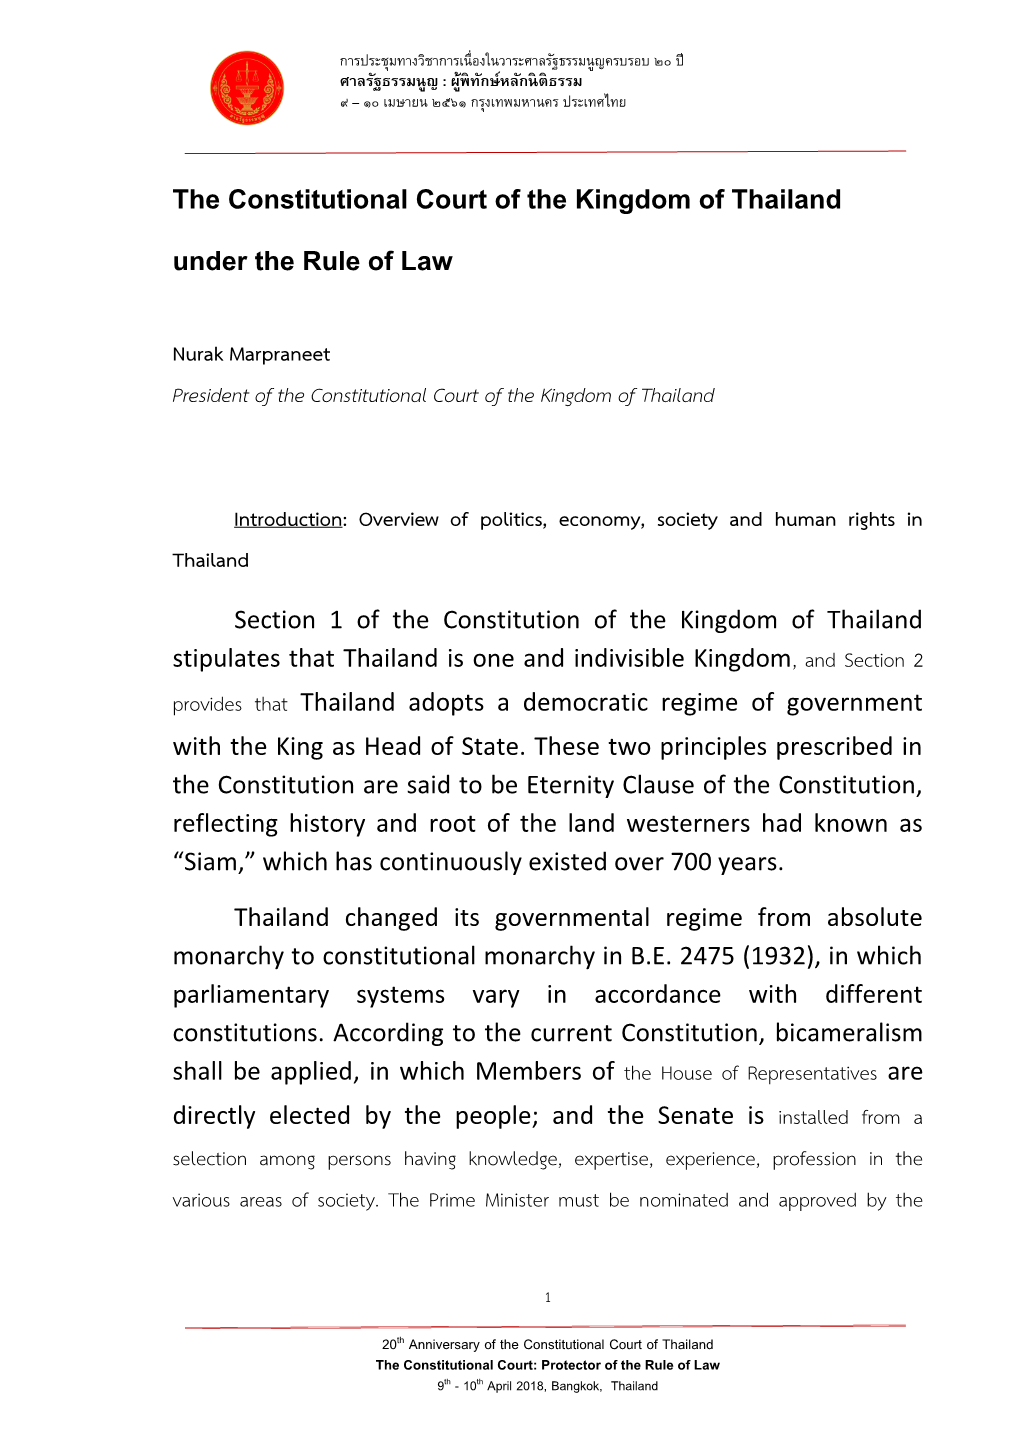 The Constitutional Court of the Kingdom of Thailand Under the Rule of Law